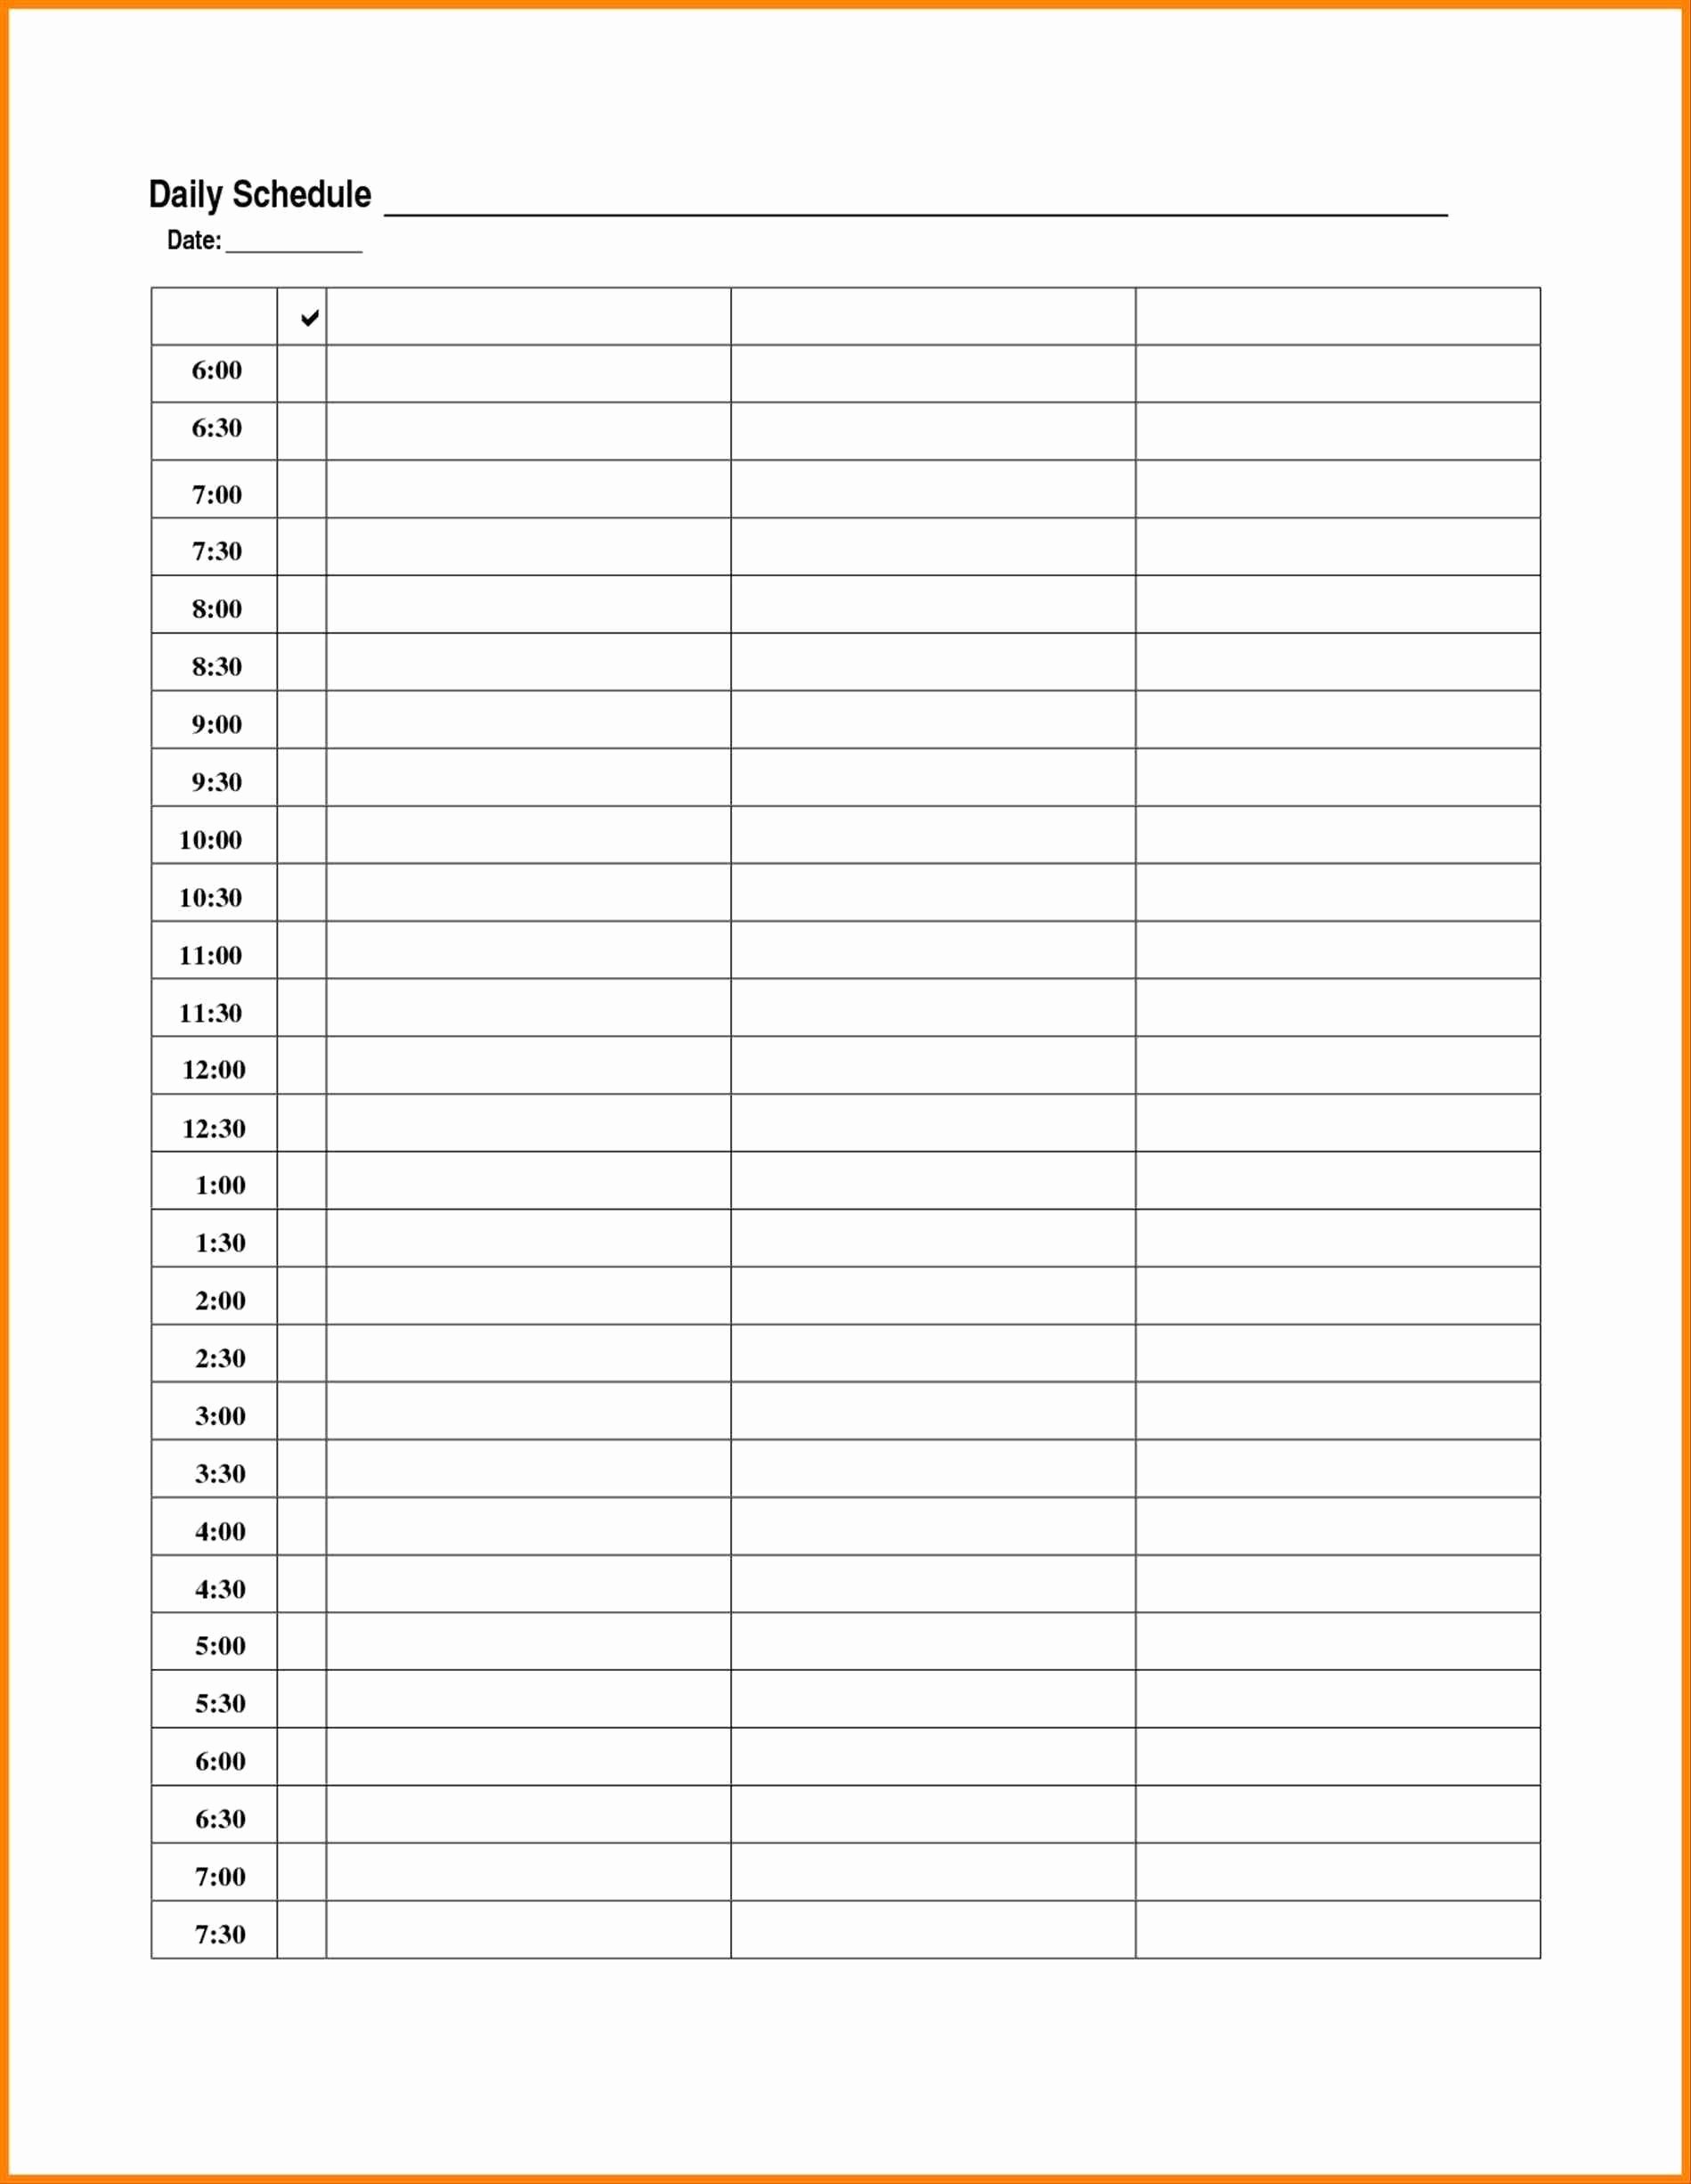 Daily Schedule Template Printable Fresh Daily Calendar Excel Template Free Printable